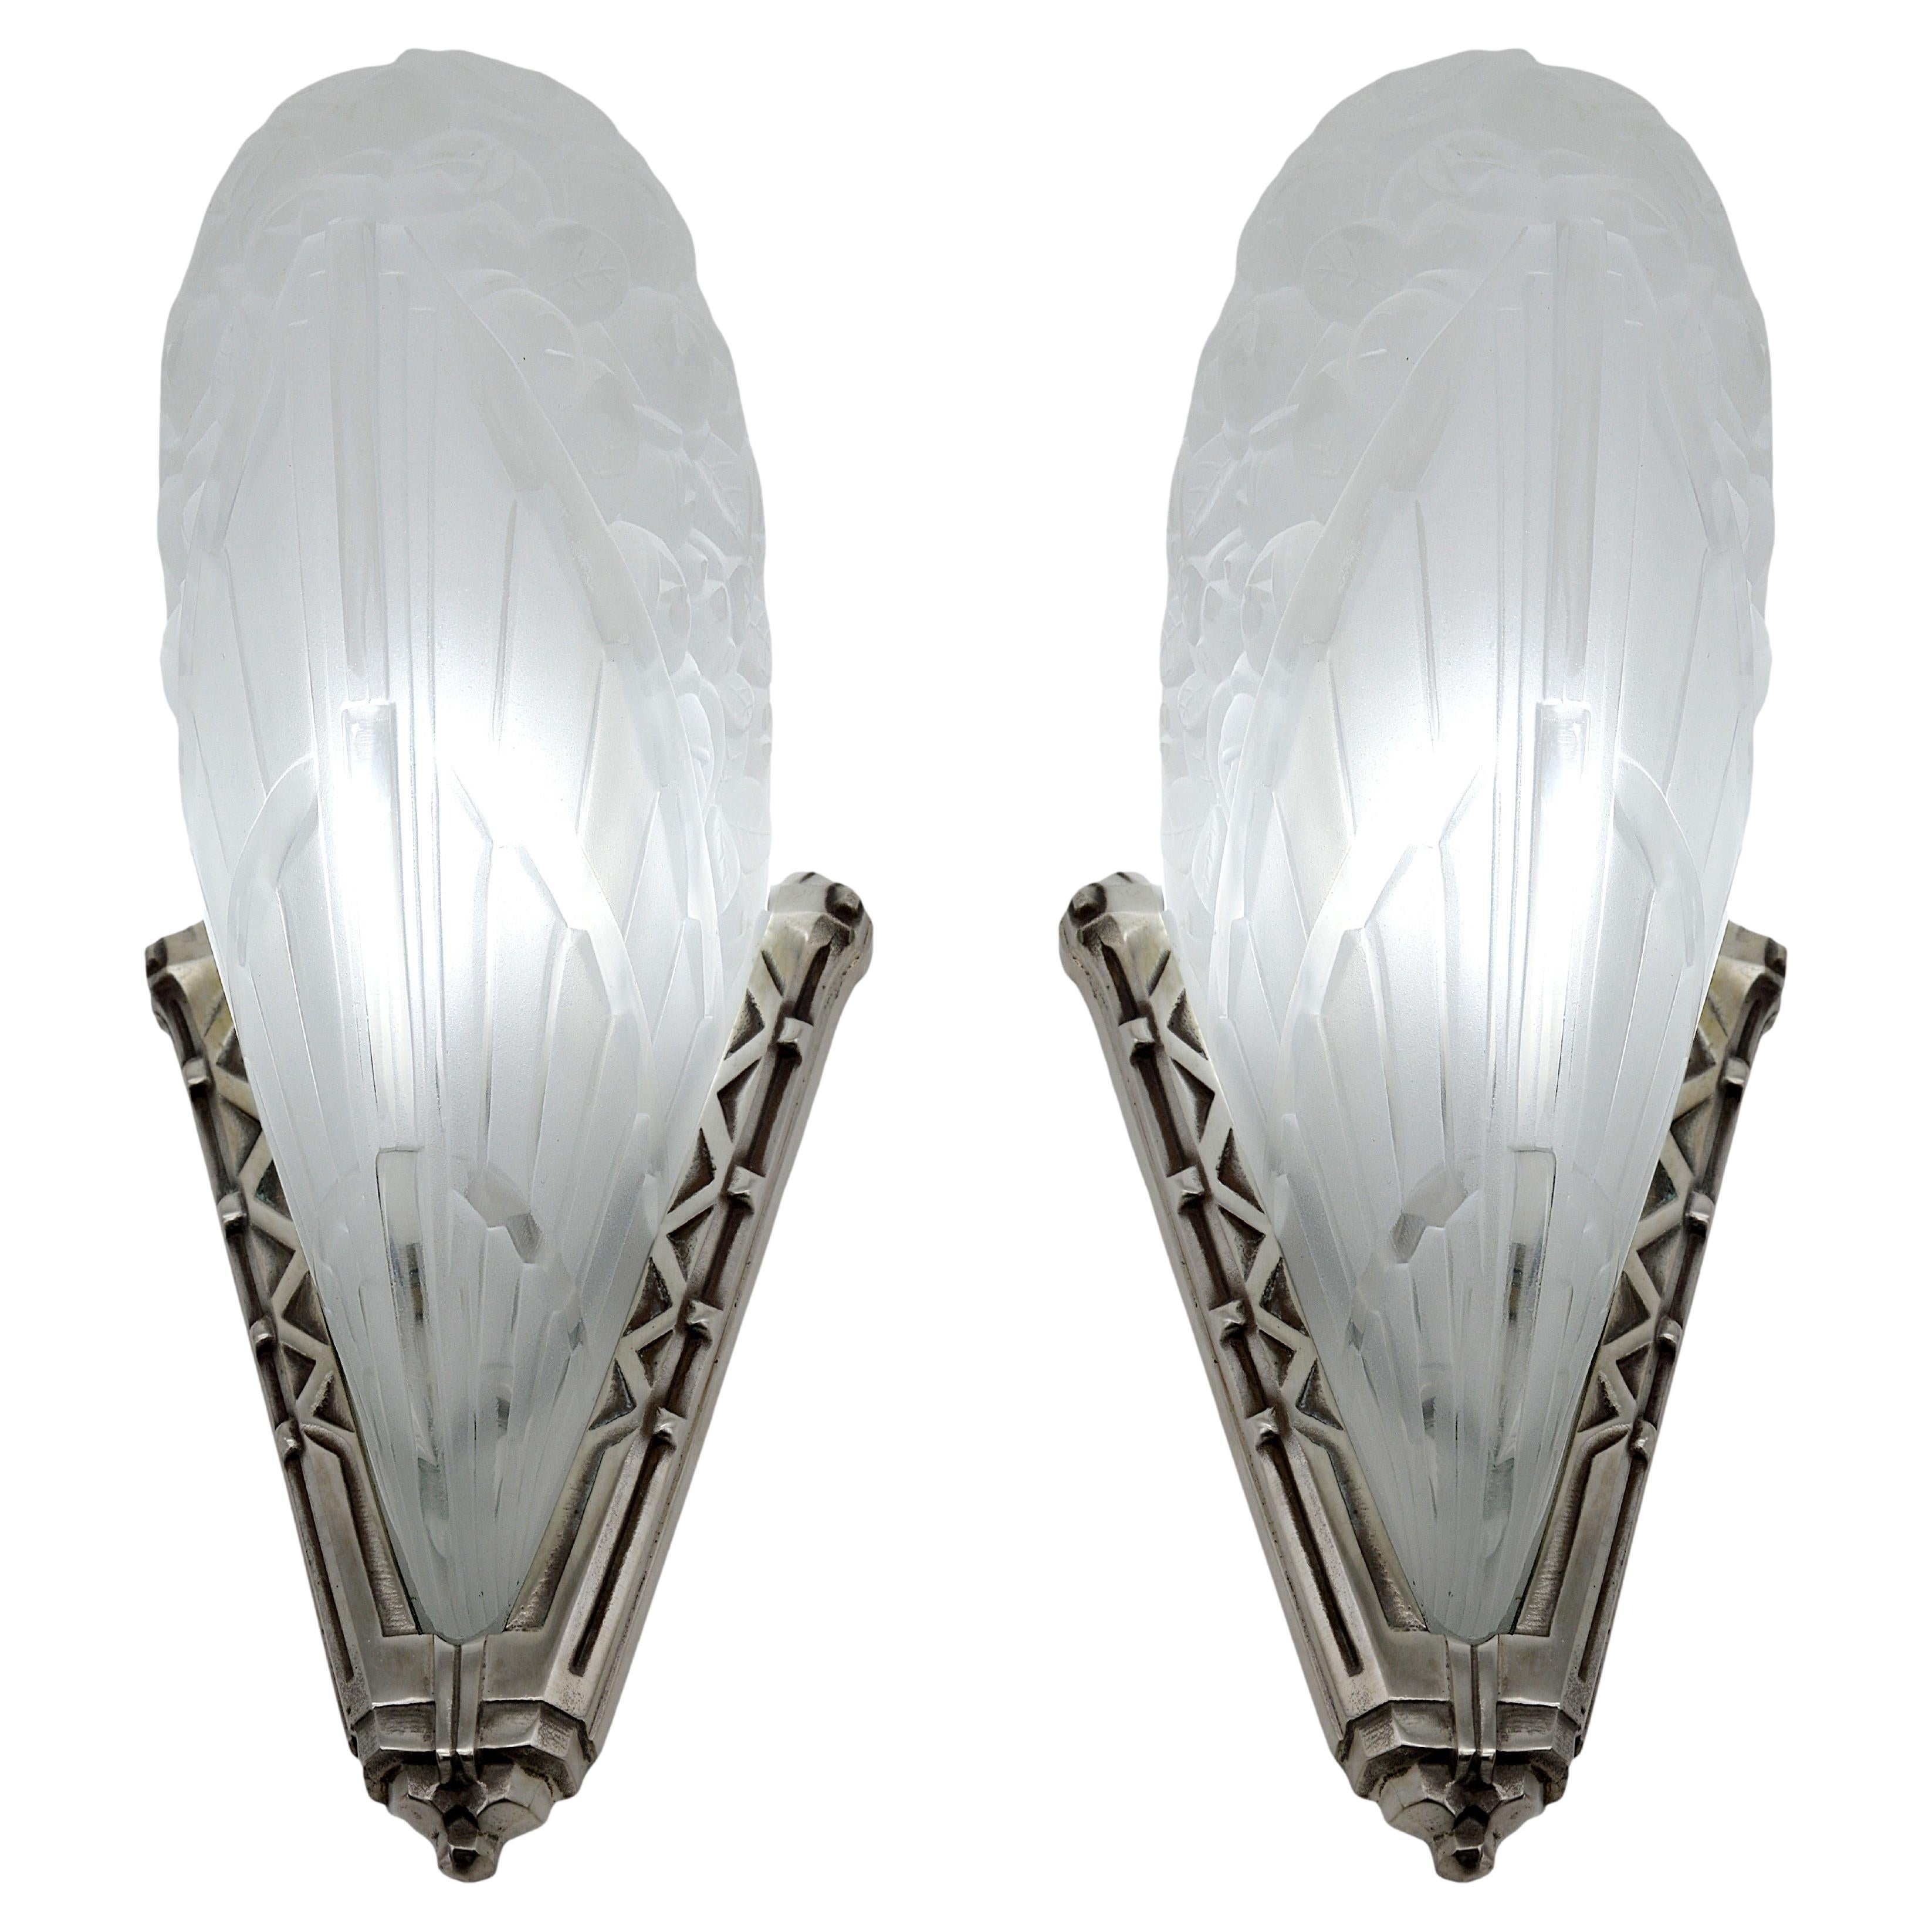 Jean Gauthier French Art Deco Pair of Wall Sconces, 1920s